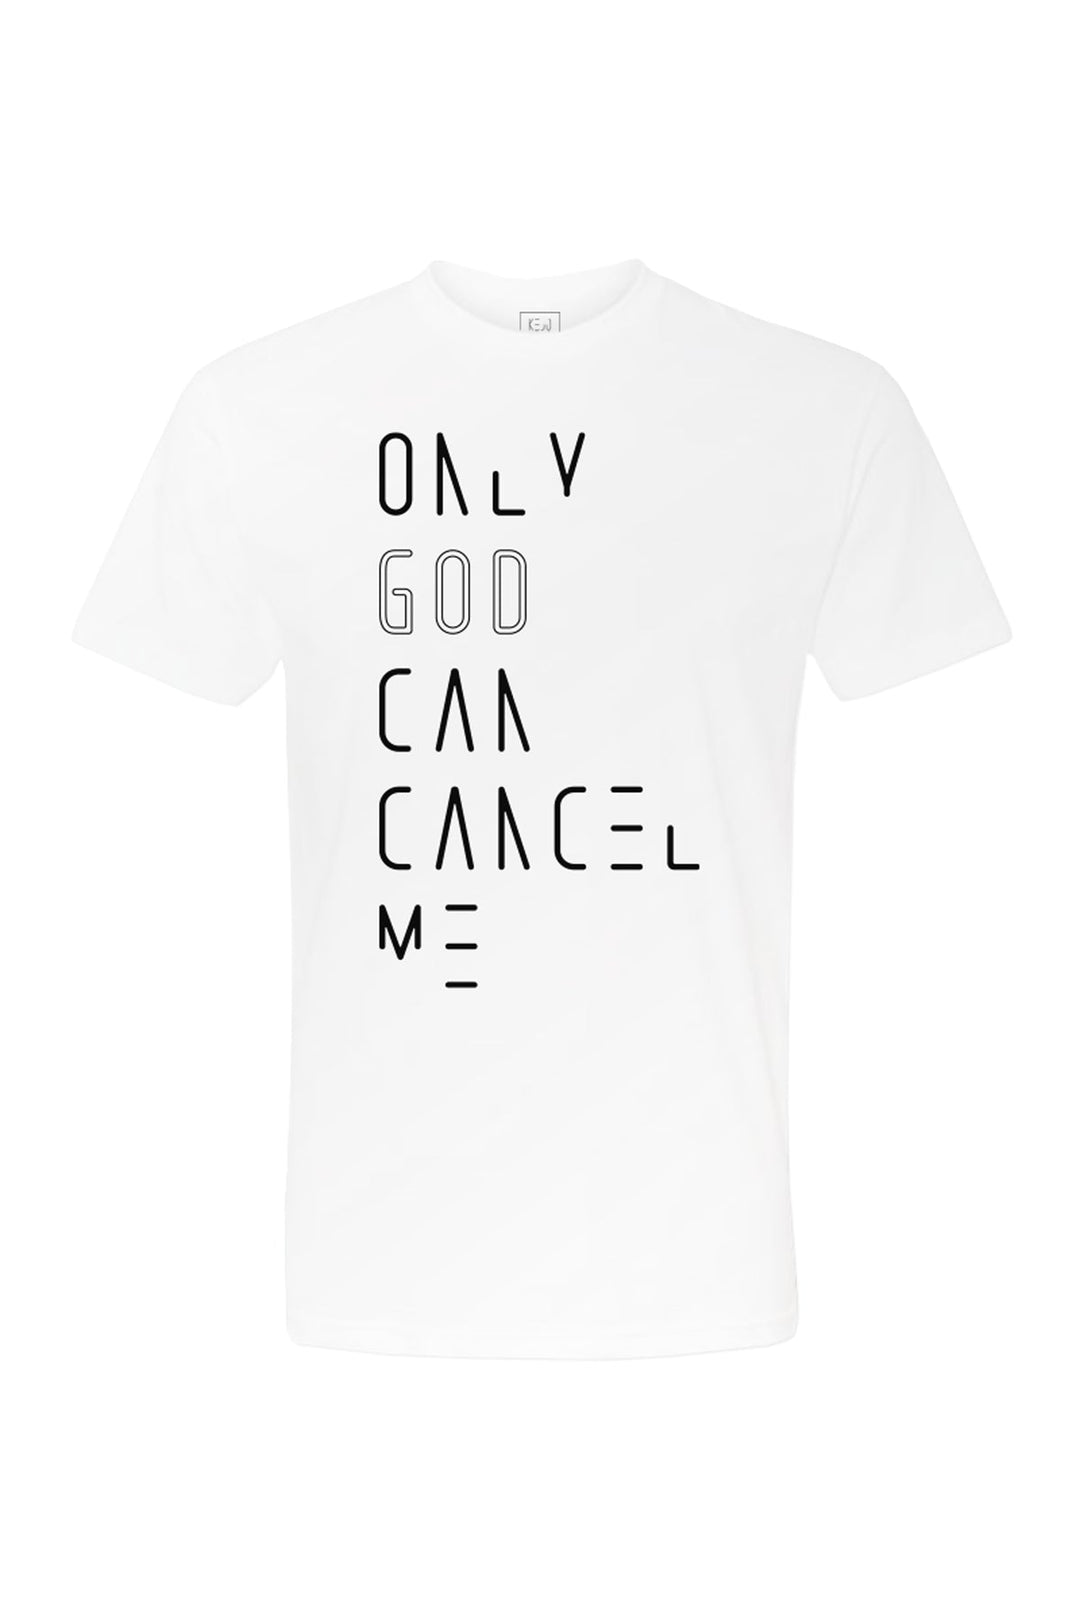 Only God Can Cancel Me (Negative Space) - Men